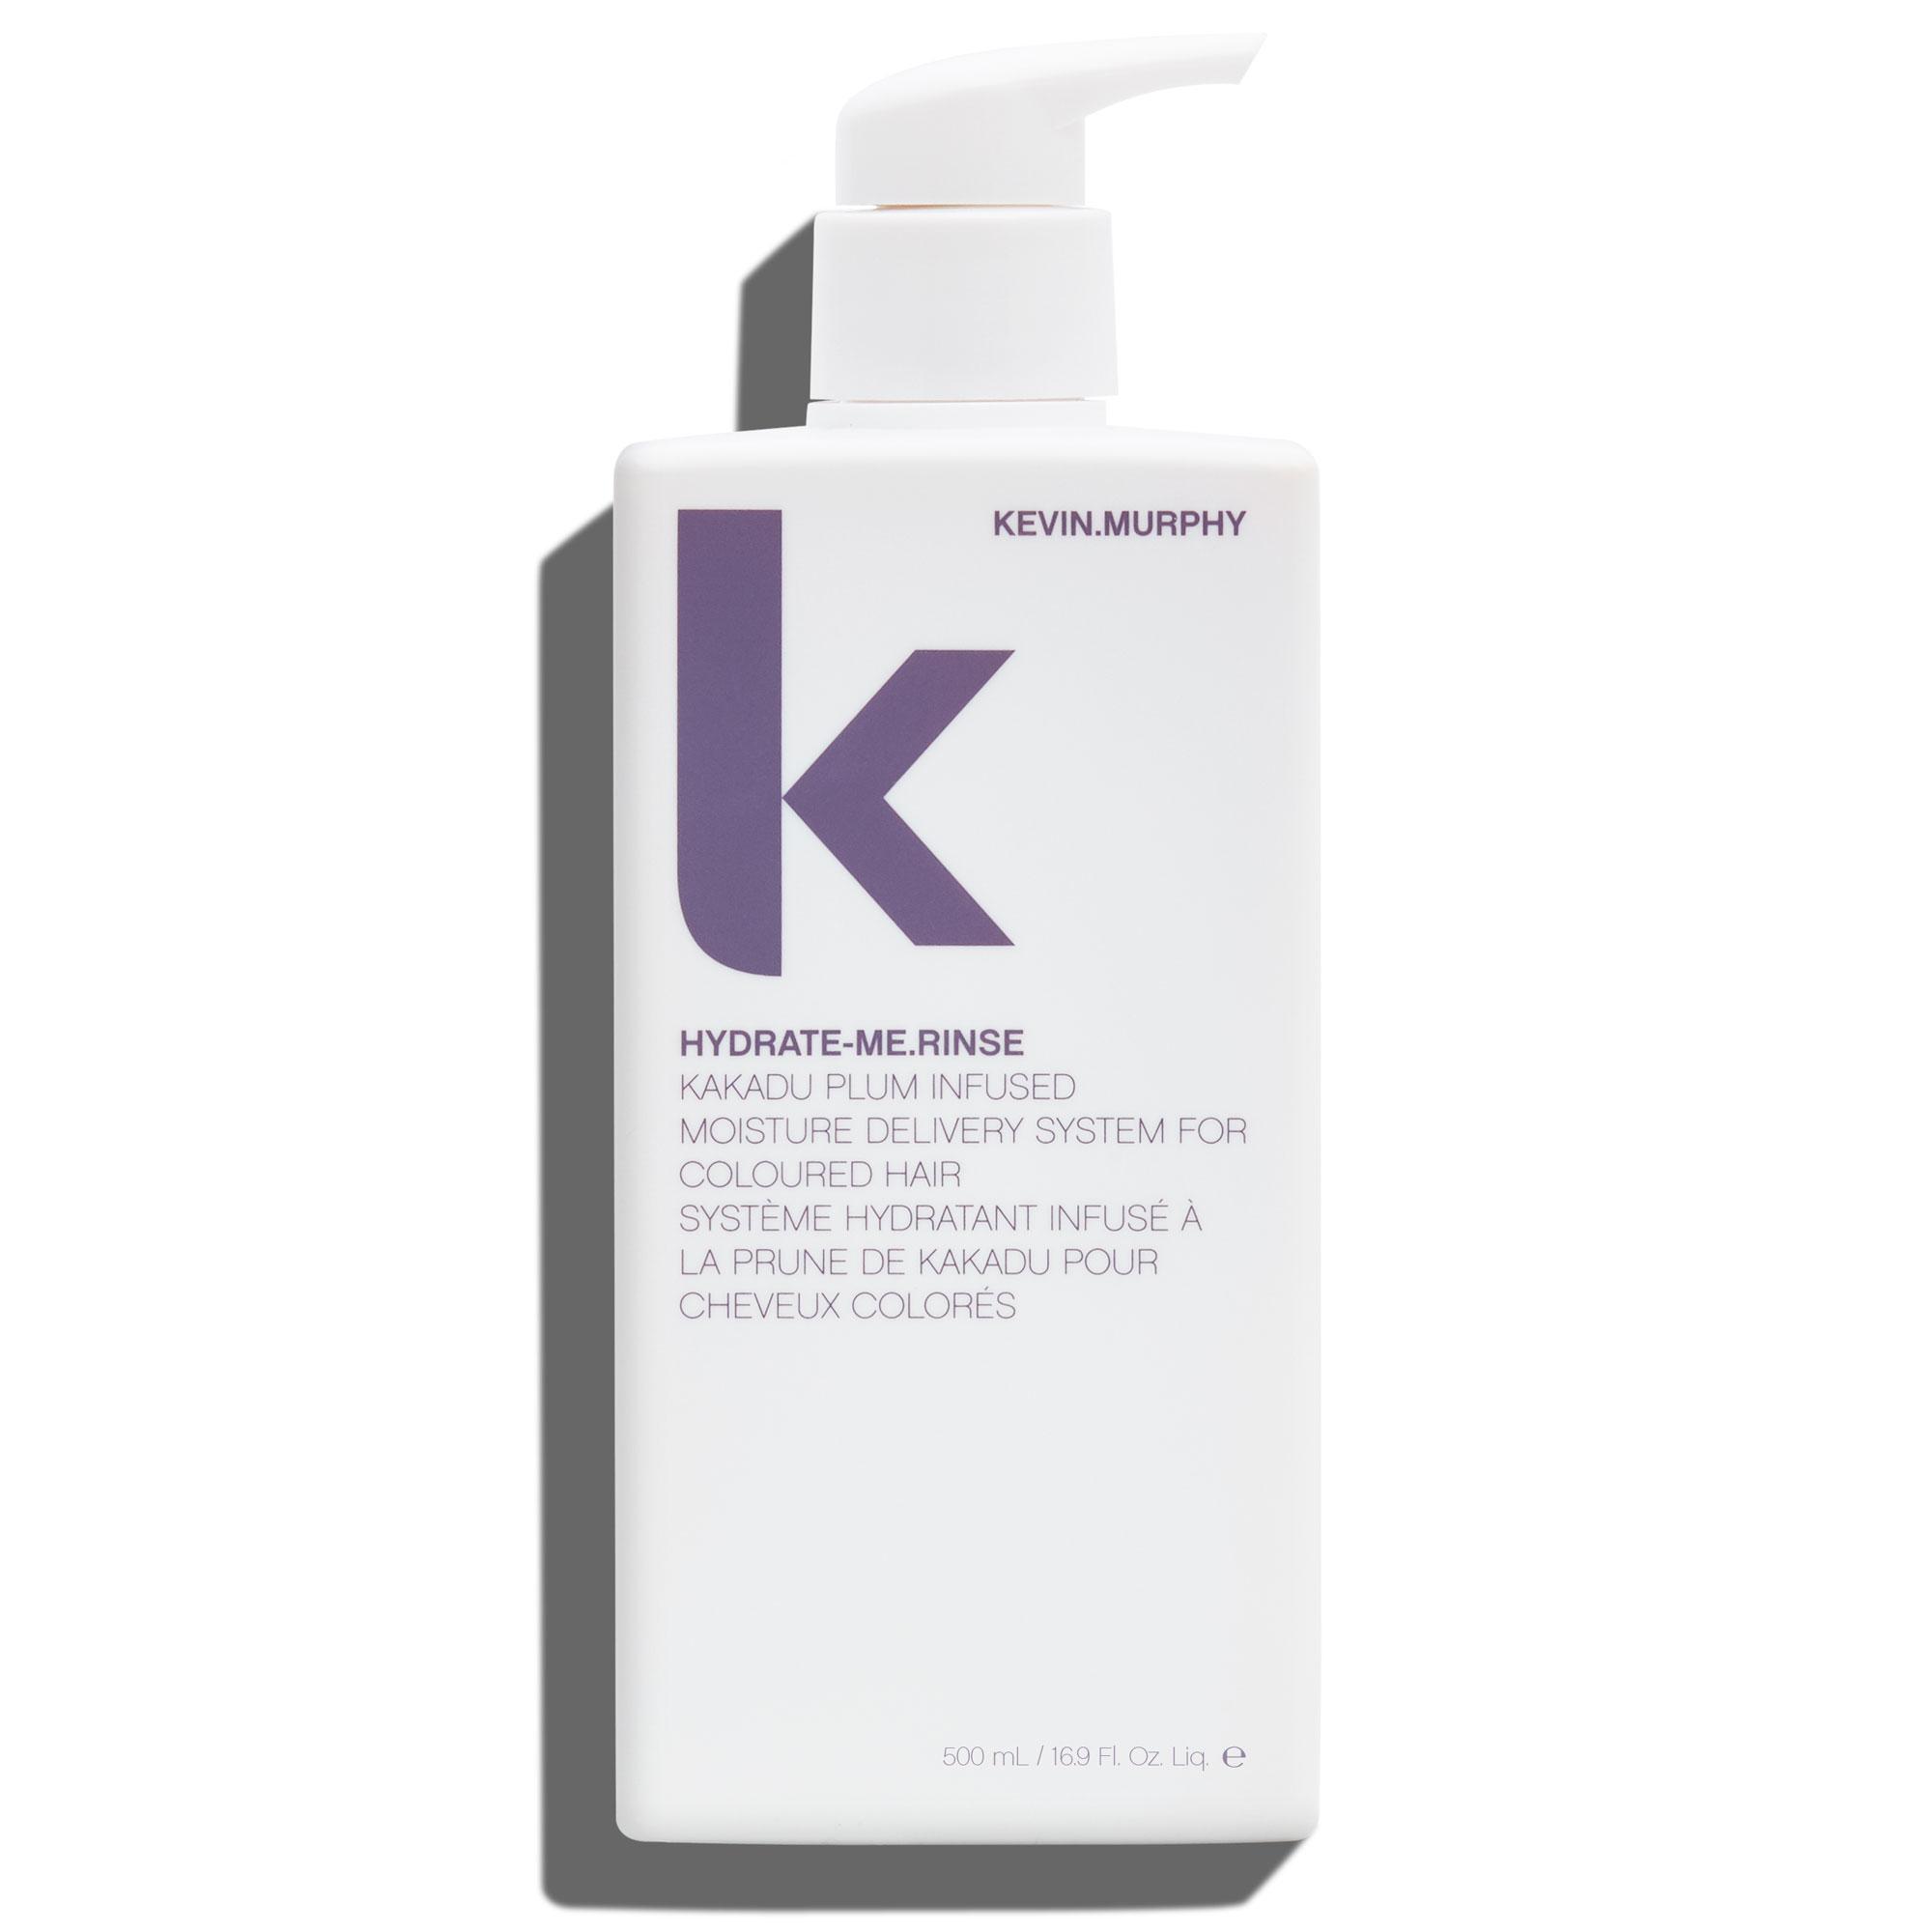 KEVIN.MURPHY HYDRATE.ME RINSE (Limited Edition) .5liter